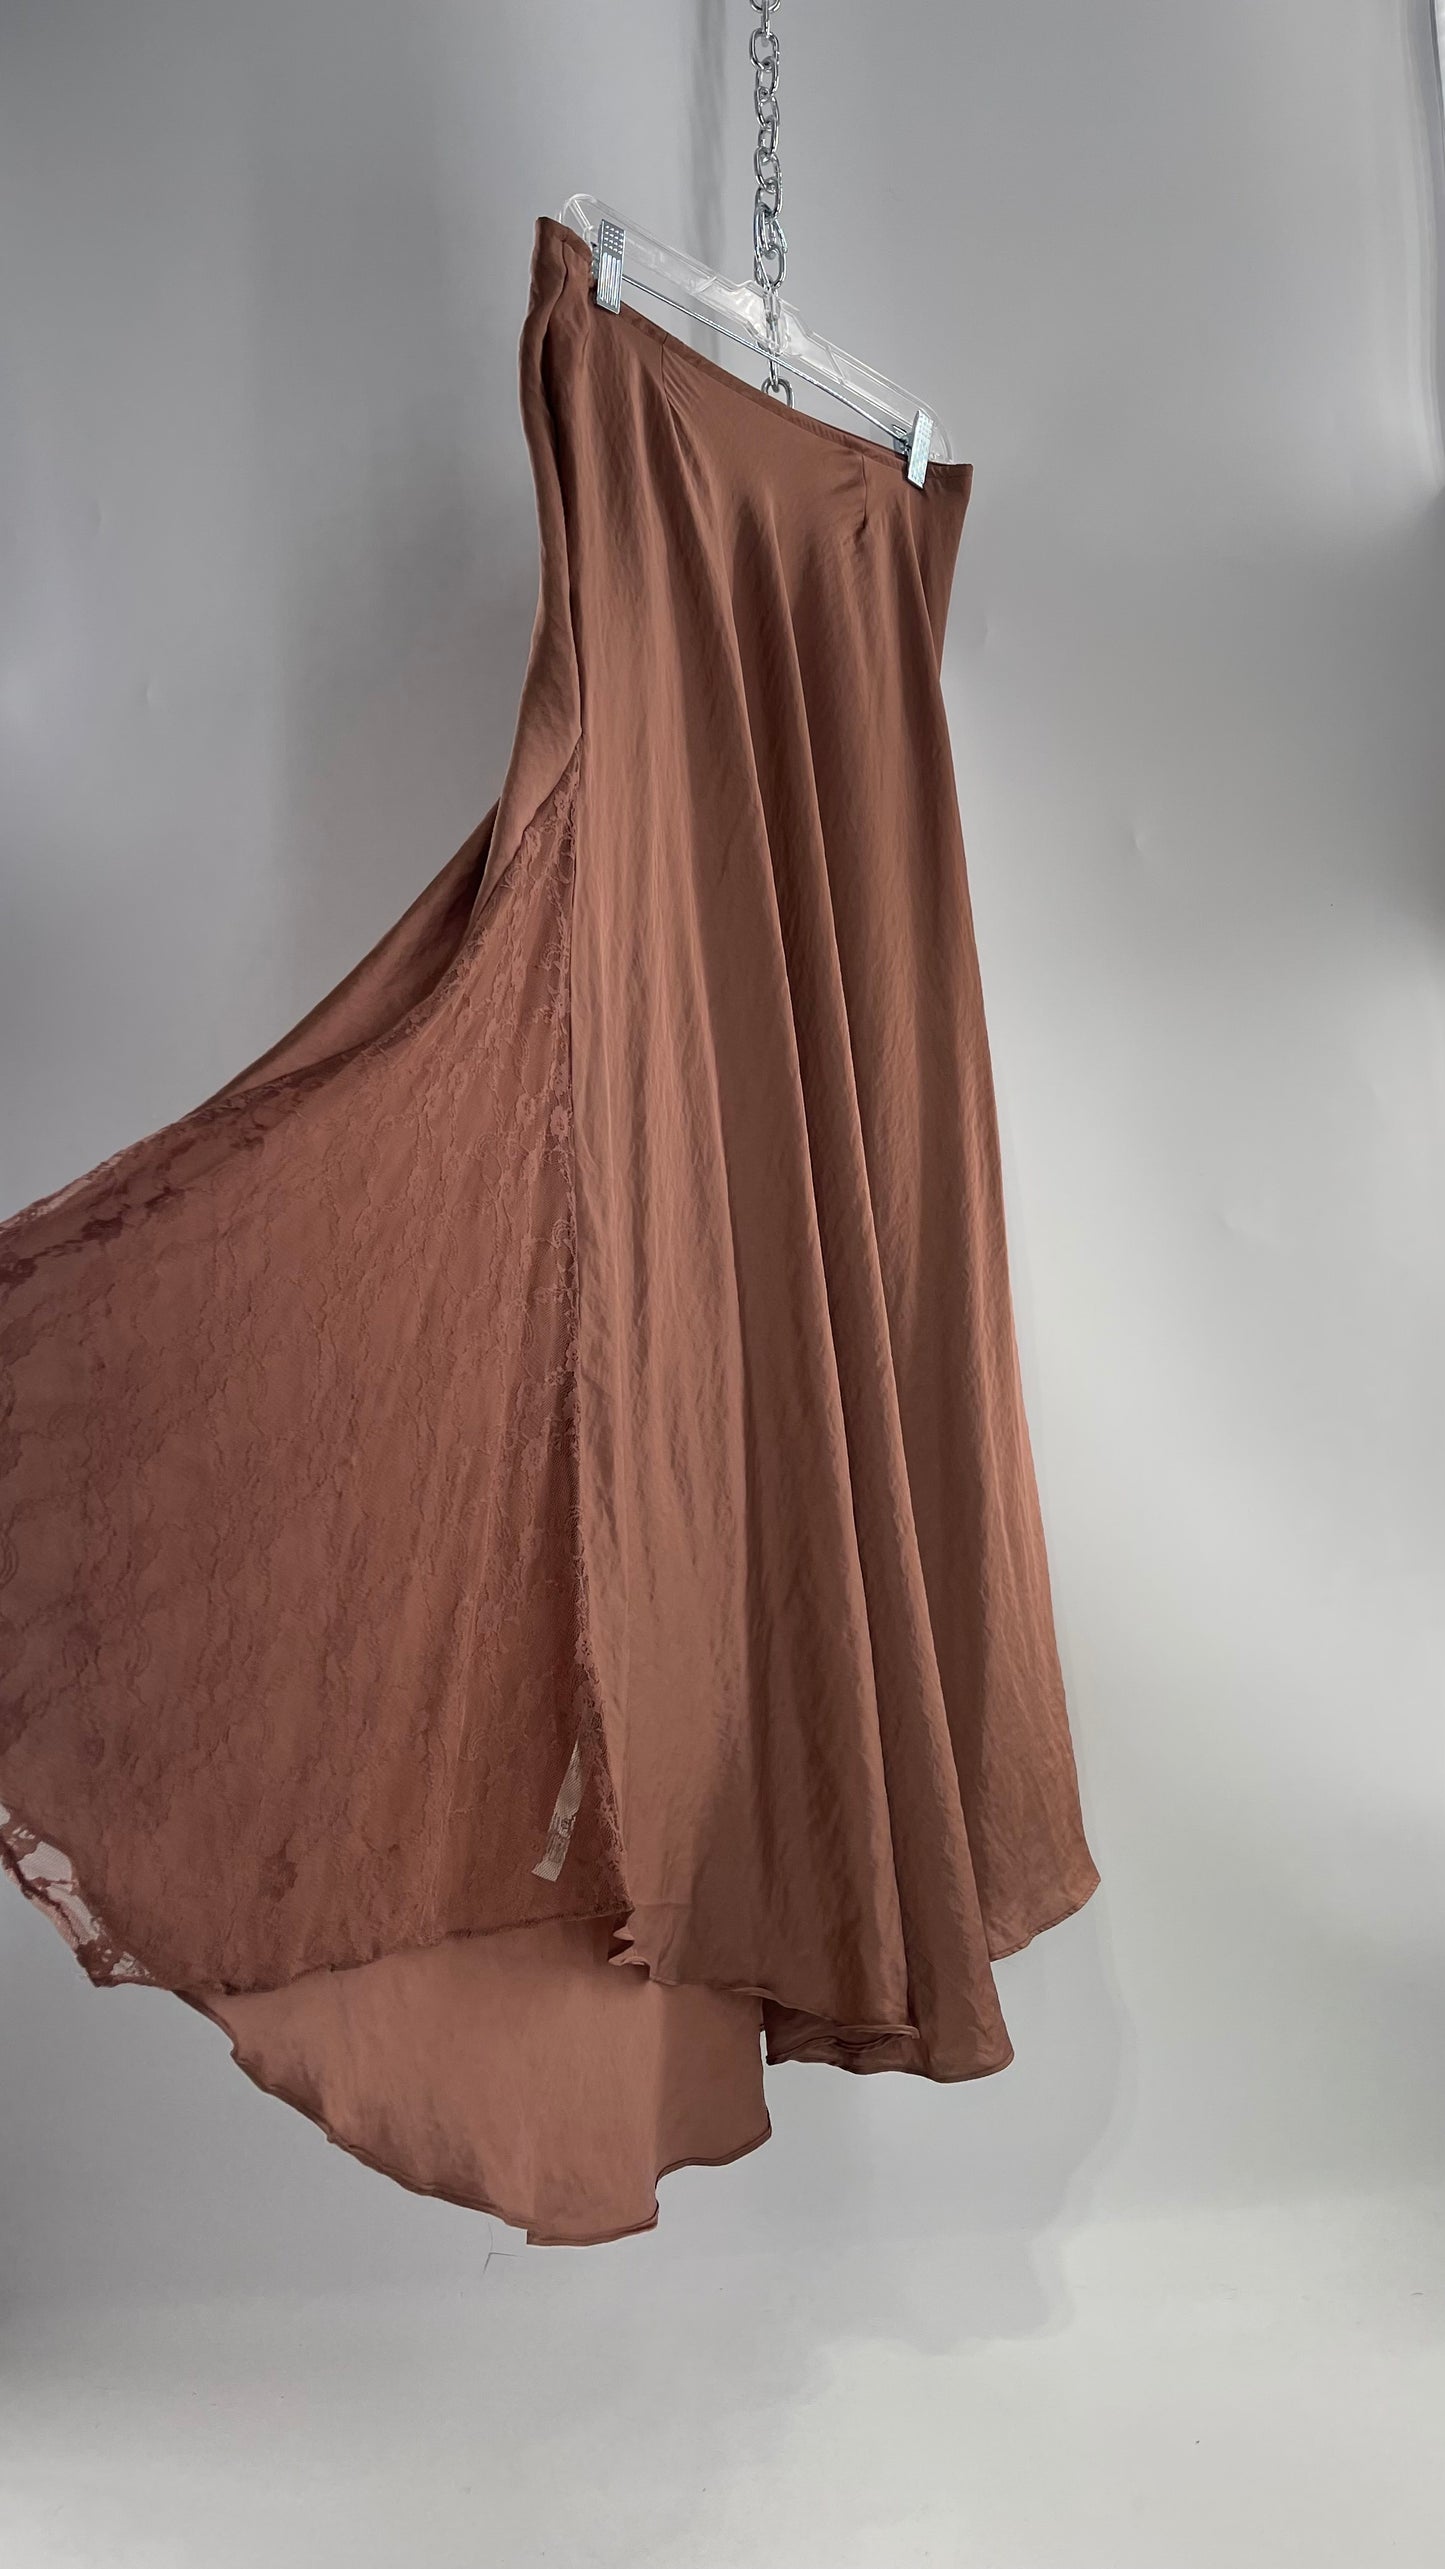 Intimately Free People Brown/Dusty Mauve Satin Maxi Skirt with Lace Paneling (Medium)